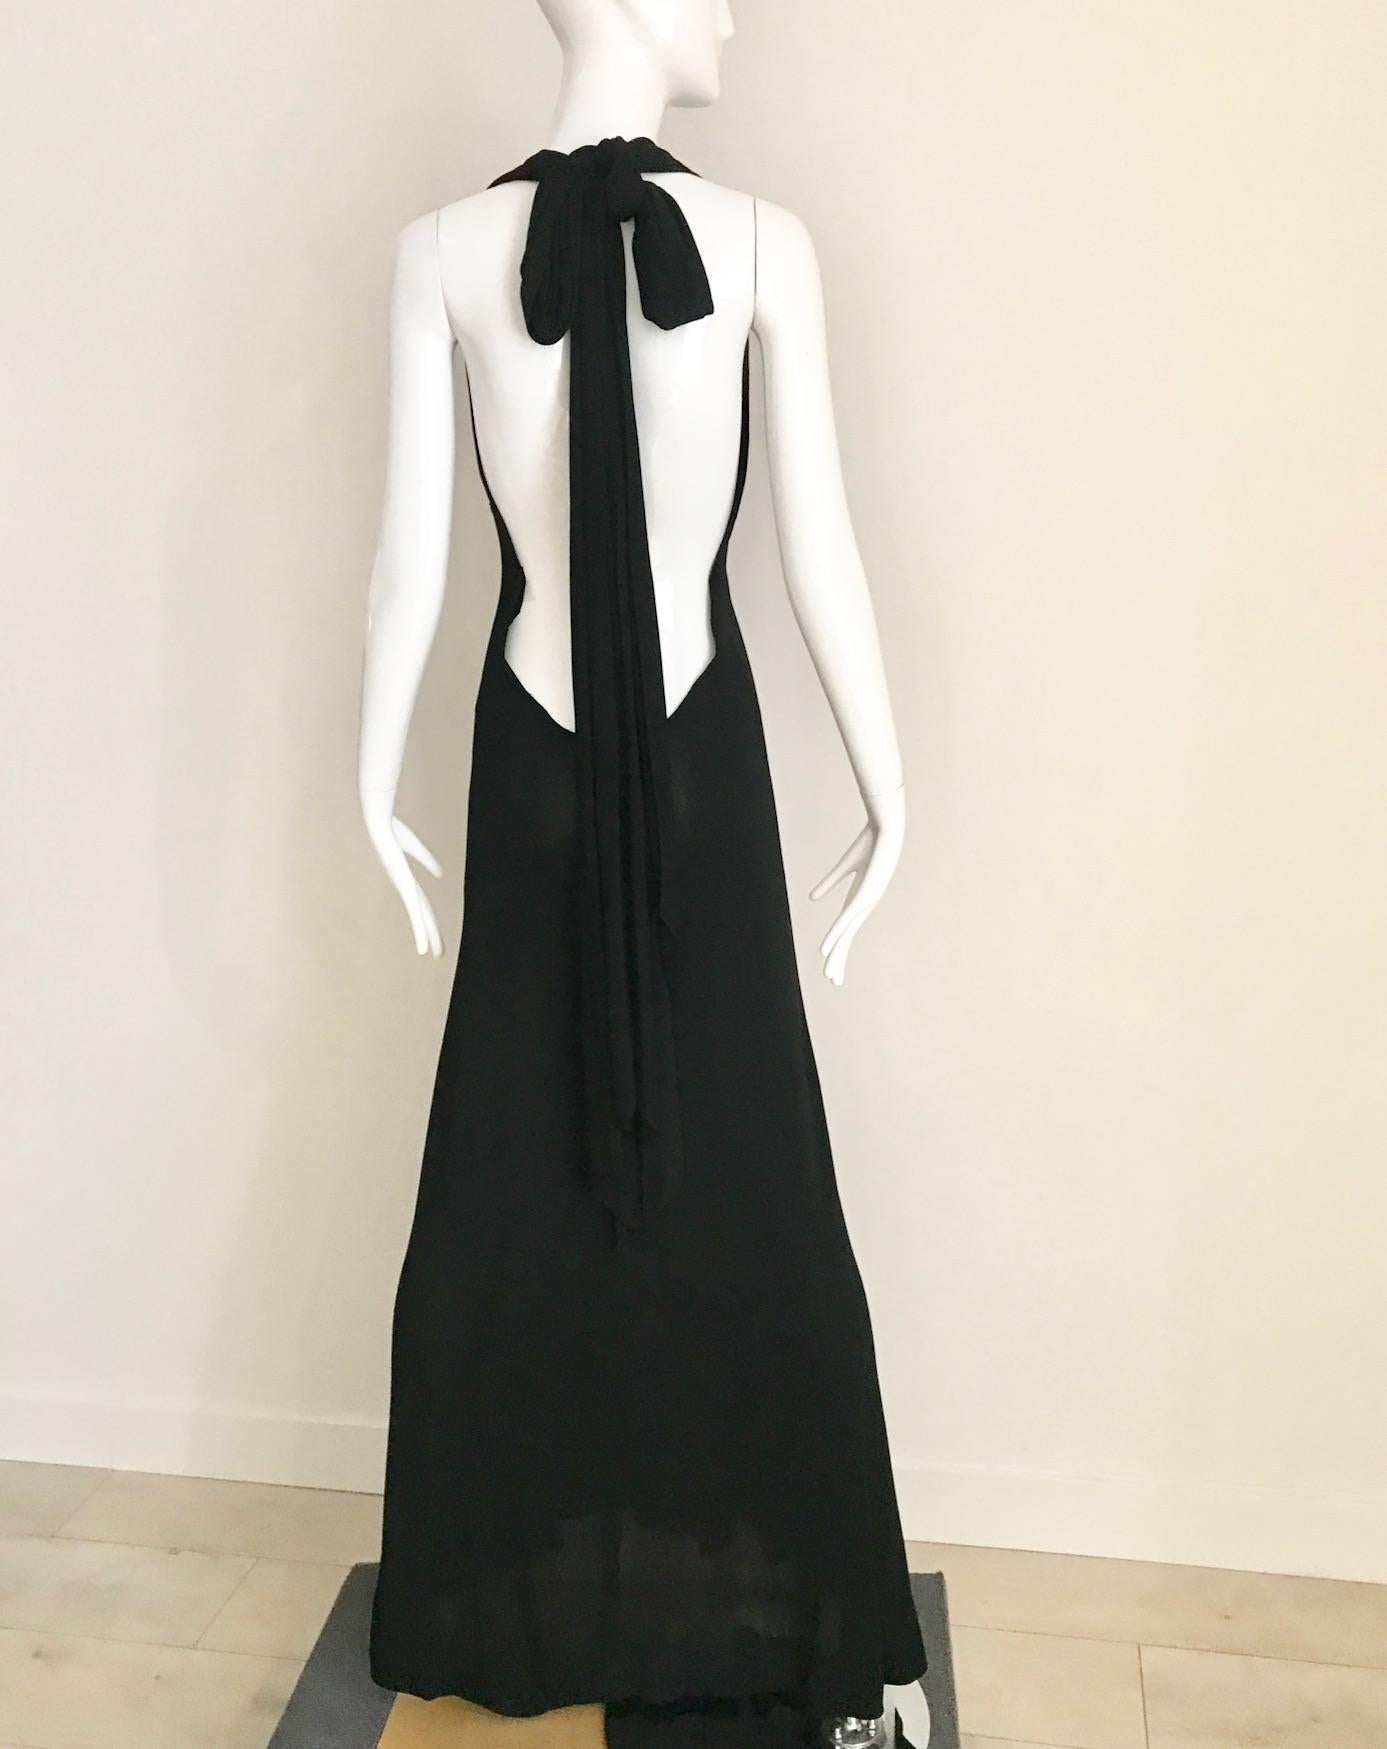 Sensational 1970s Halston black matte jersey gown with bare back. Long jersey train can be tied as a bow or let it hang.  Bare is exposed. Slip on gown with no zipper or fastener. Halston is a master of the bias cut! 
SMALL-Medium
Bust: 34" 